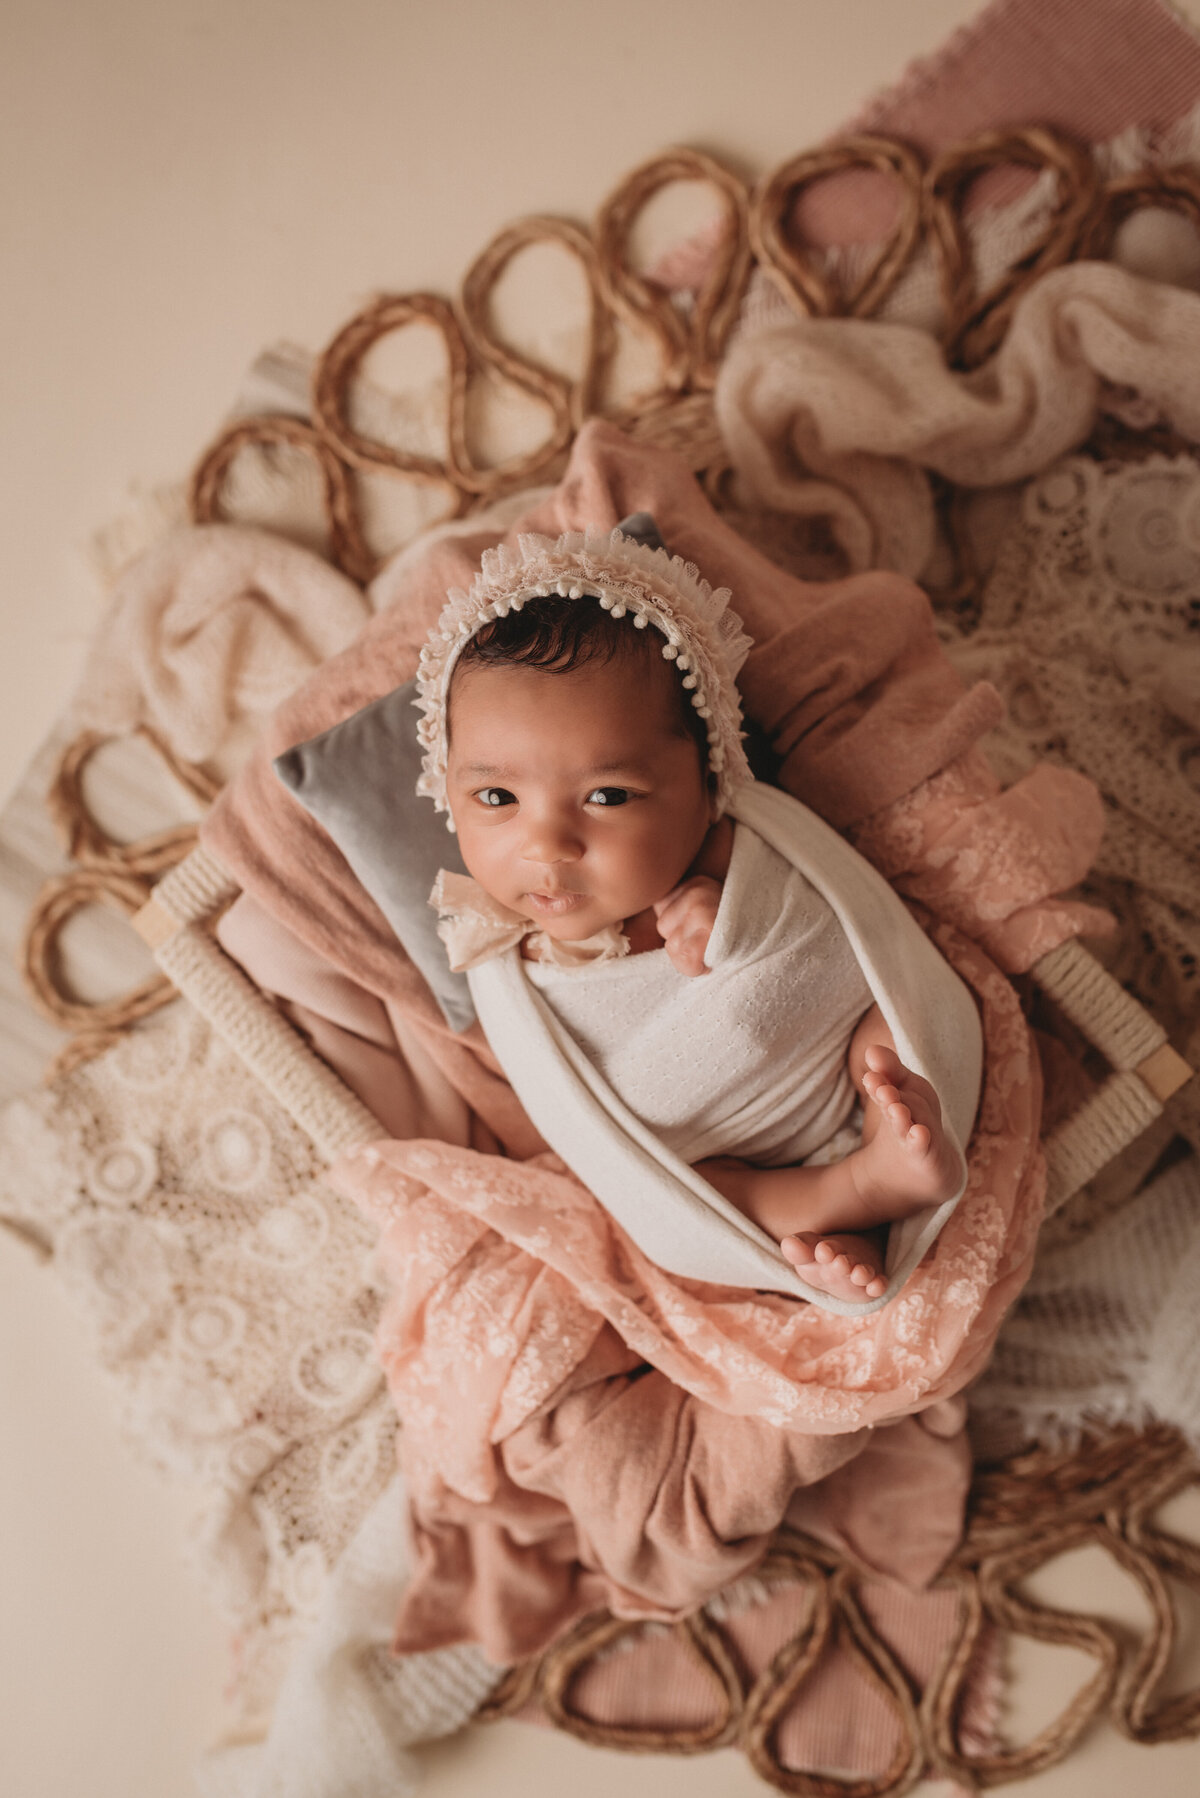 Baby girl at her newborn portrait session in  pink and white hat laying in boho themed creams and tan setup